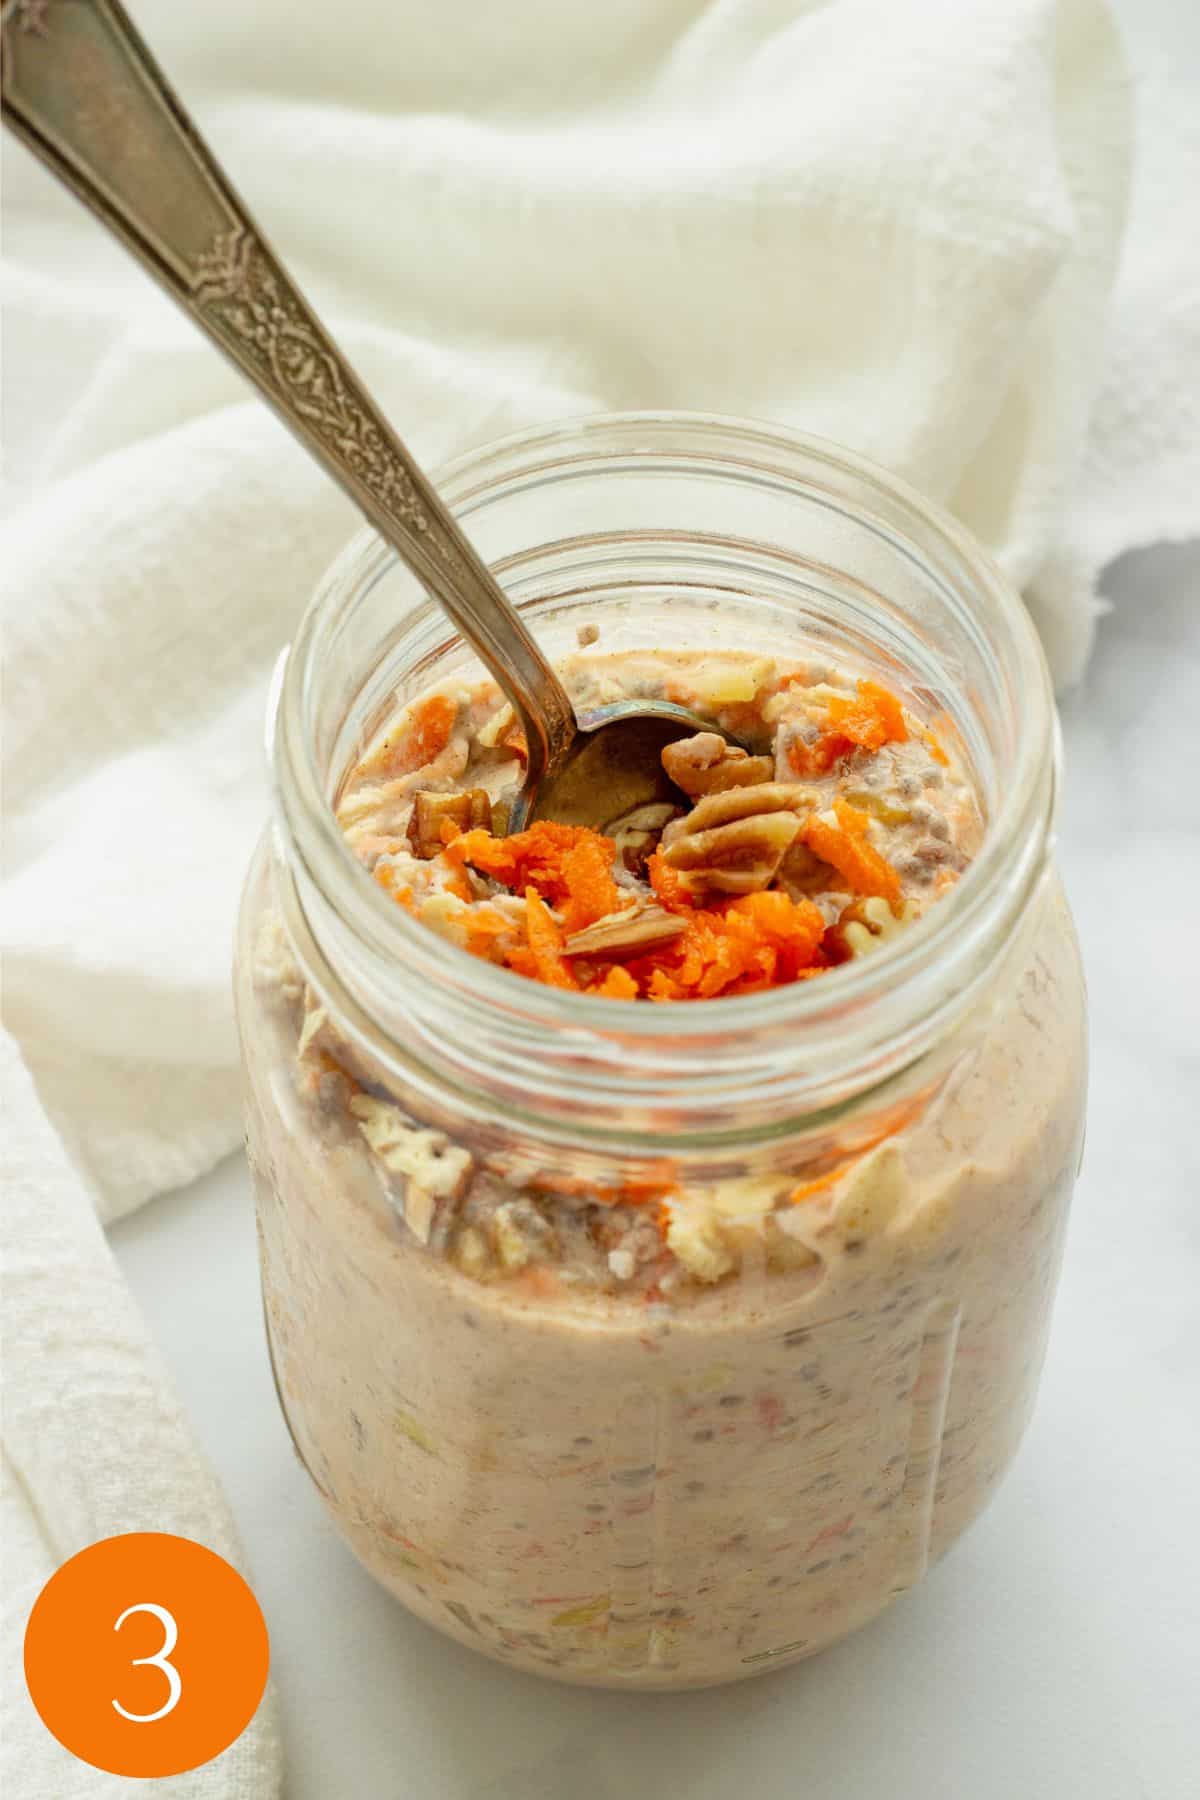 Step 3 to make carrot cake overnight oats.